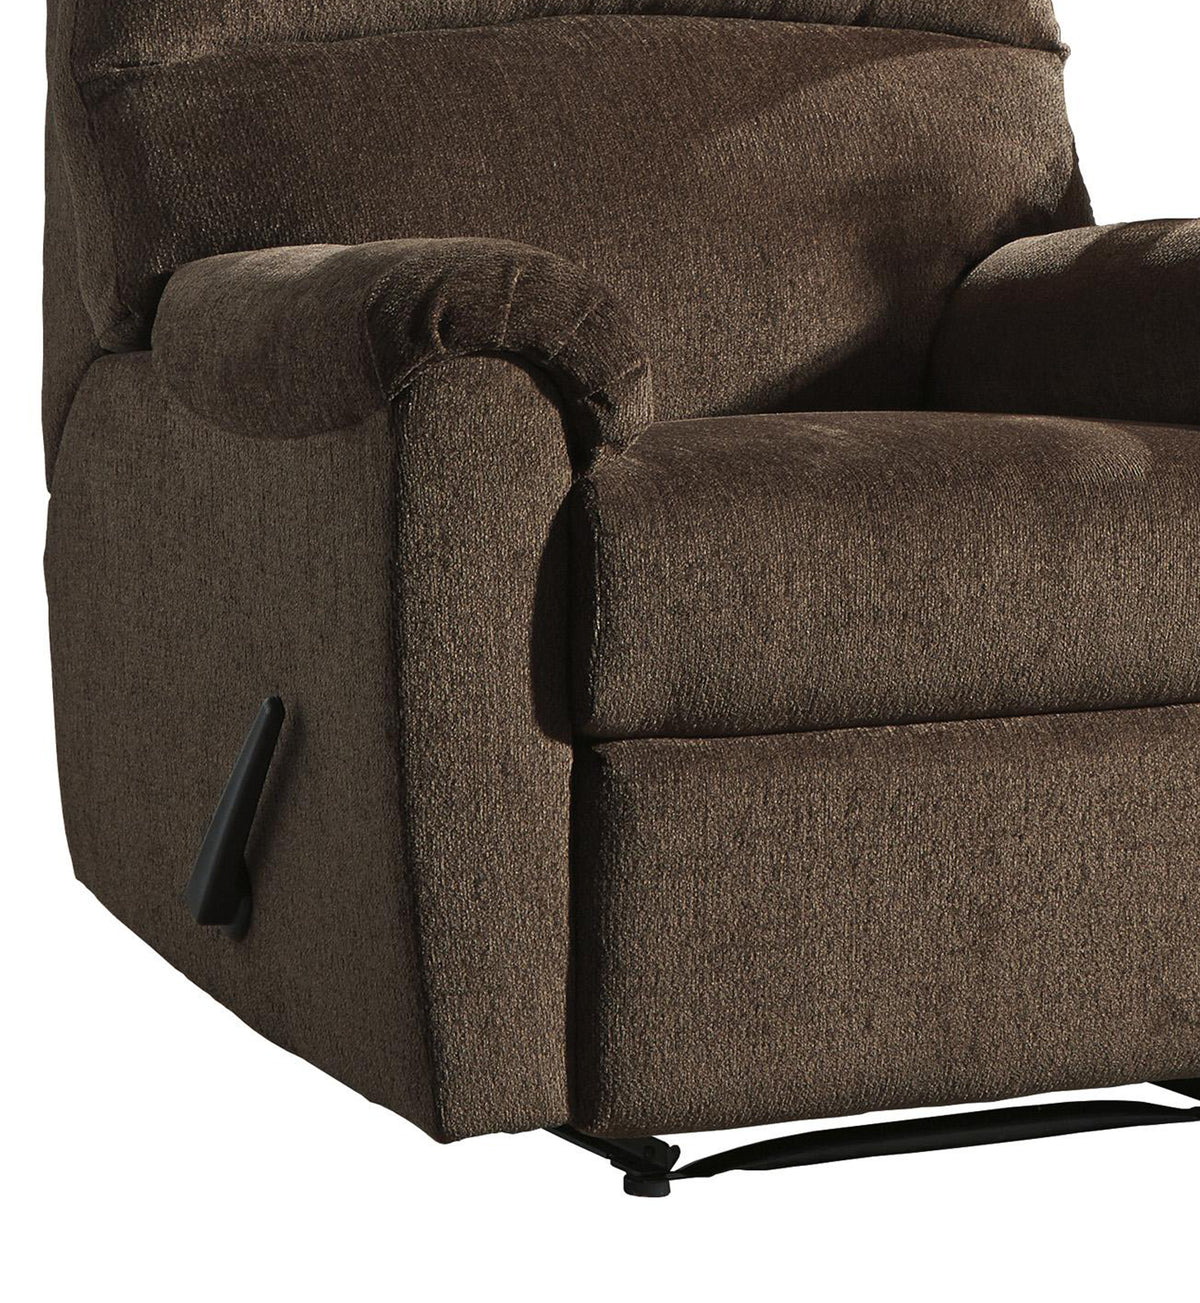 Fabric Upholstered Wooden Recliner Loveseat with Tufted Detail, Gray - BM204421